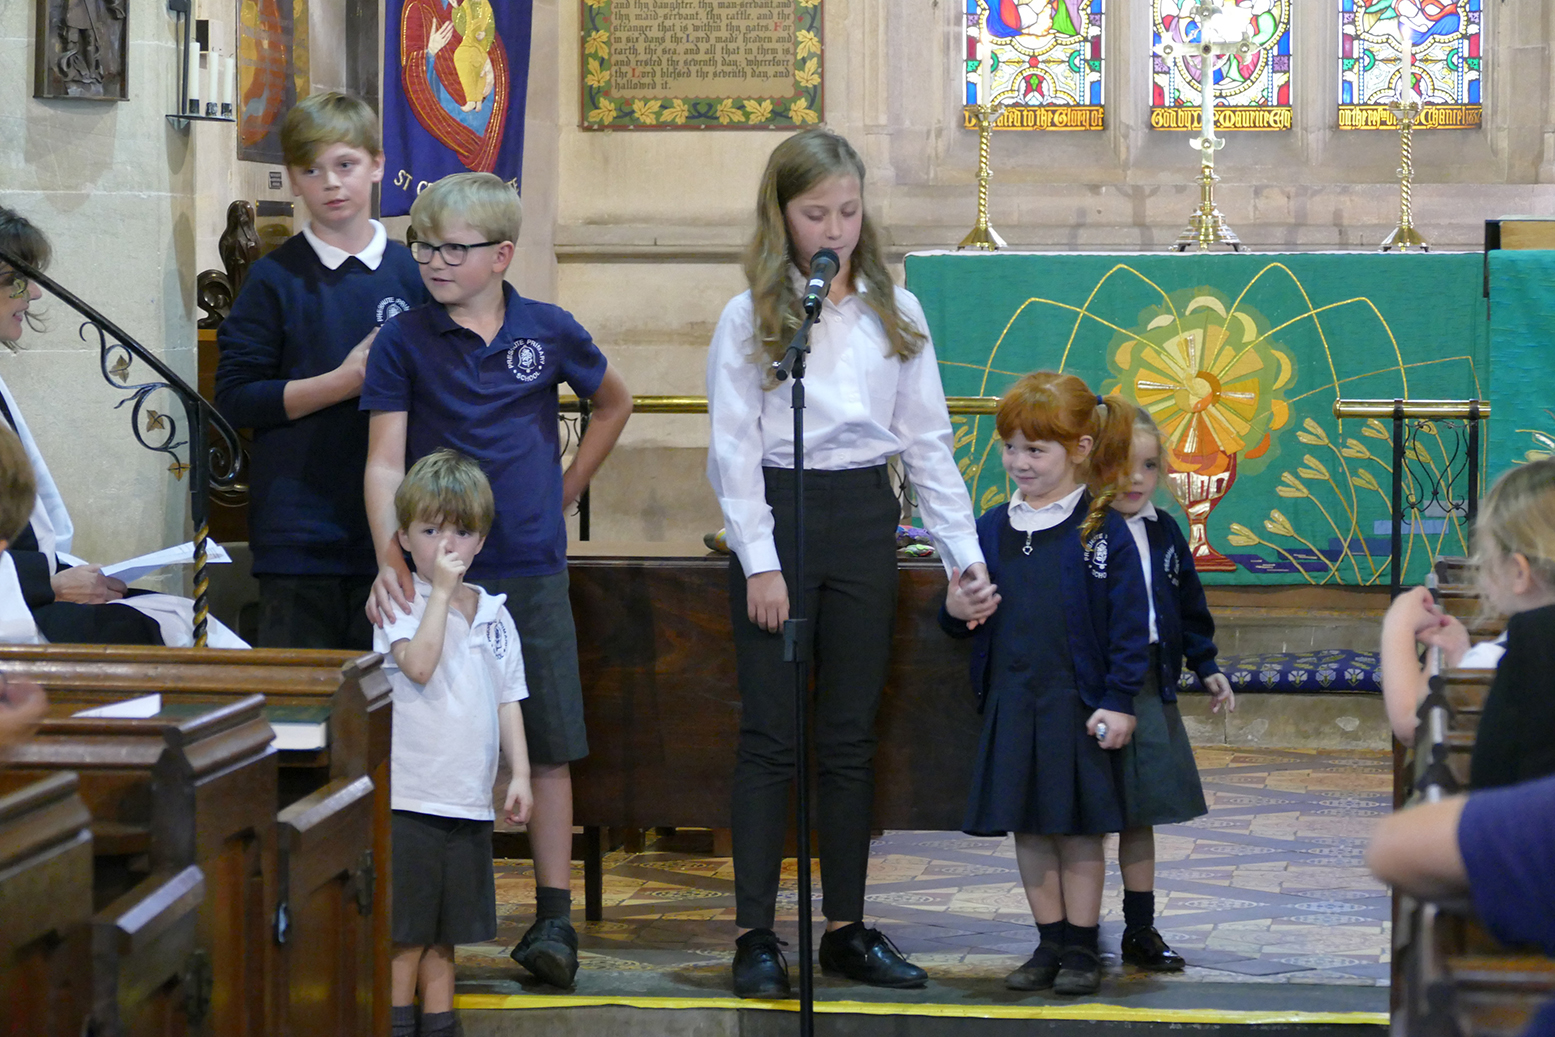 Year 6 and Reception pupils from Preshute C of E Primary School pair up as buddies in a service held in St George’s Church, Preshute